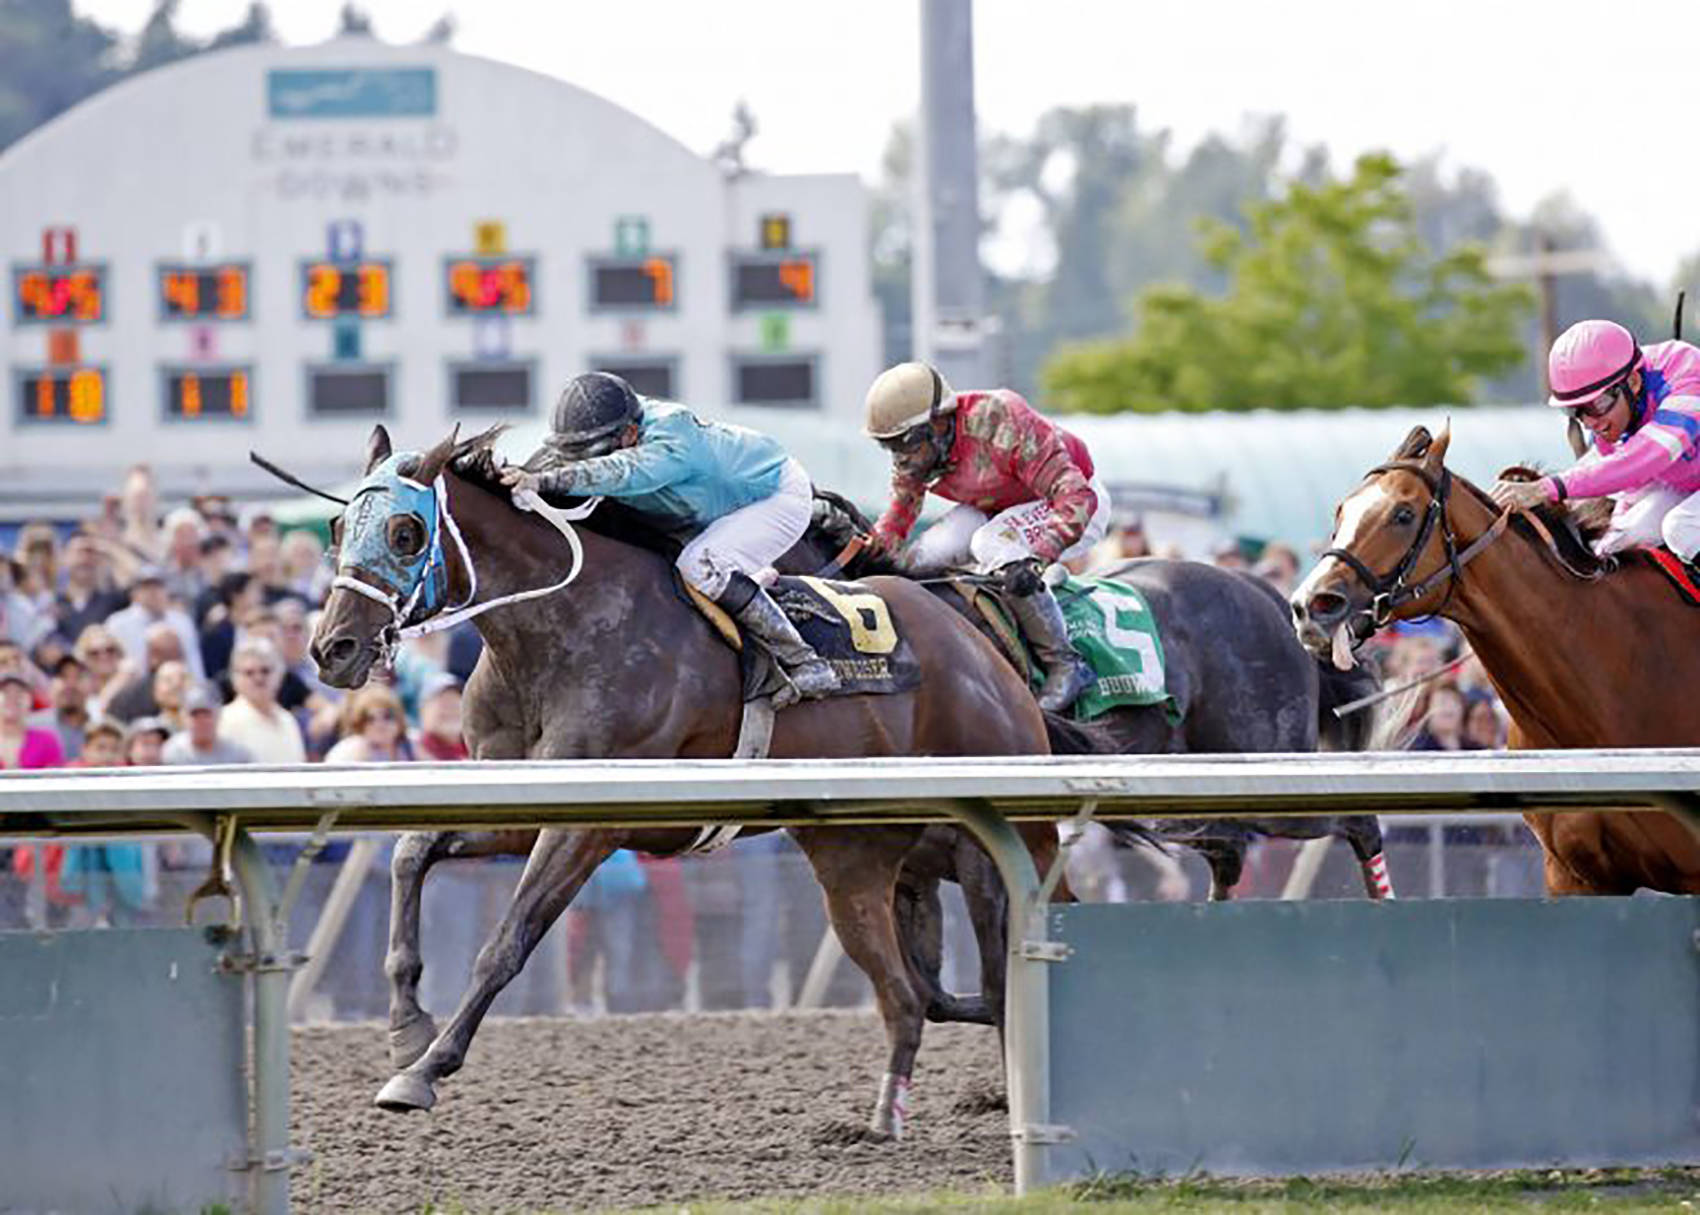 Mach One Rules, ridden by Isaias Enriquez, left, captures the $50,000 Budweiser Stakes for 3-year-olds and up at Emerald Downs on Sunday. COURTESY PHOTO